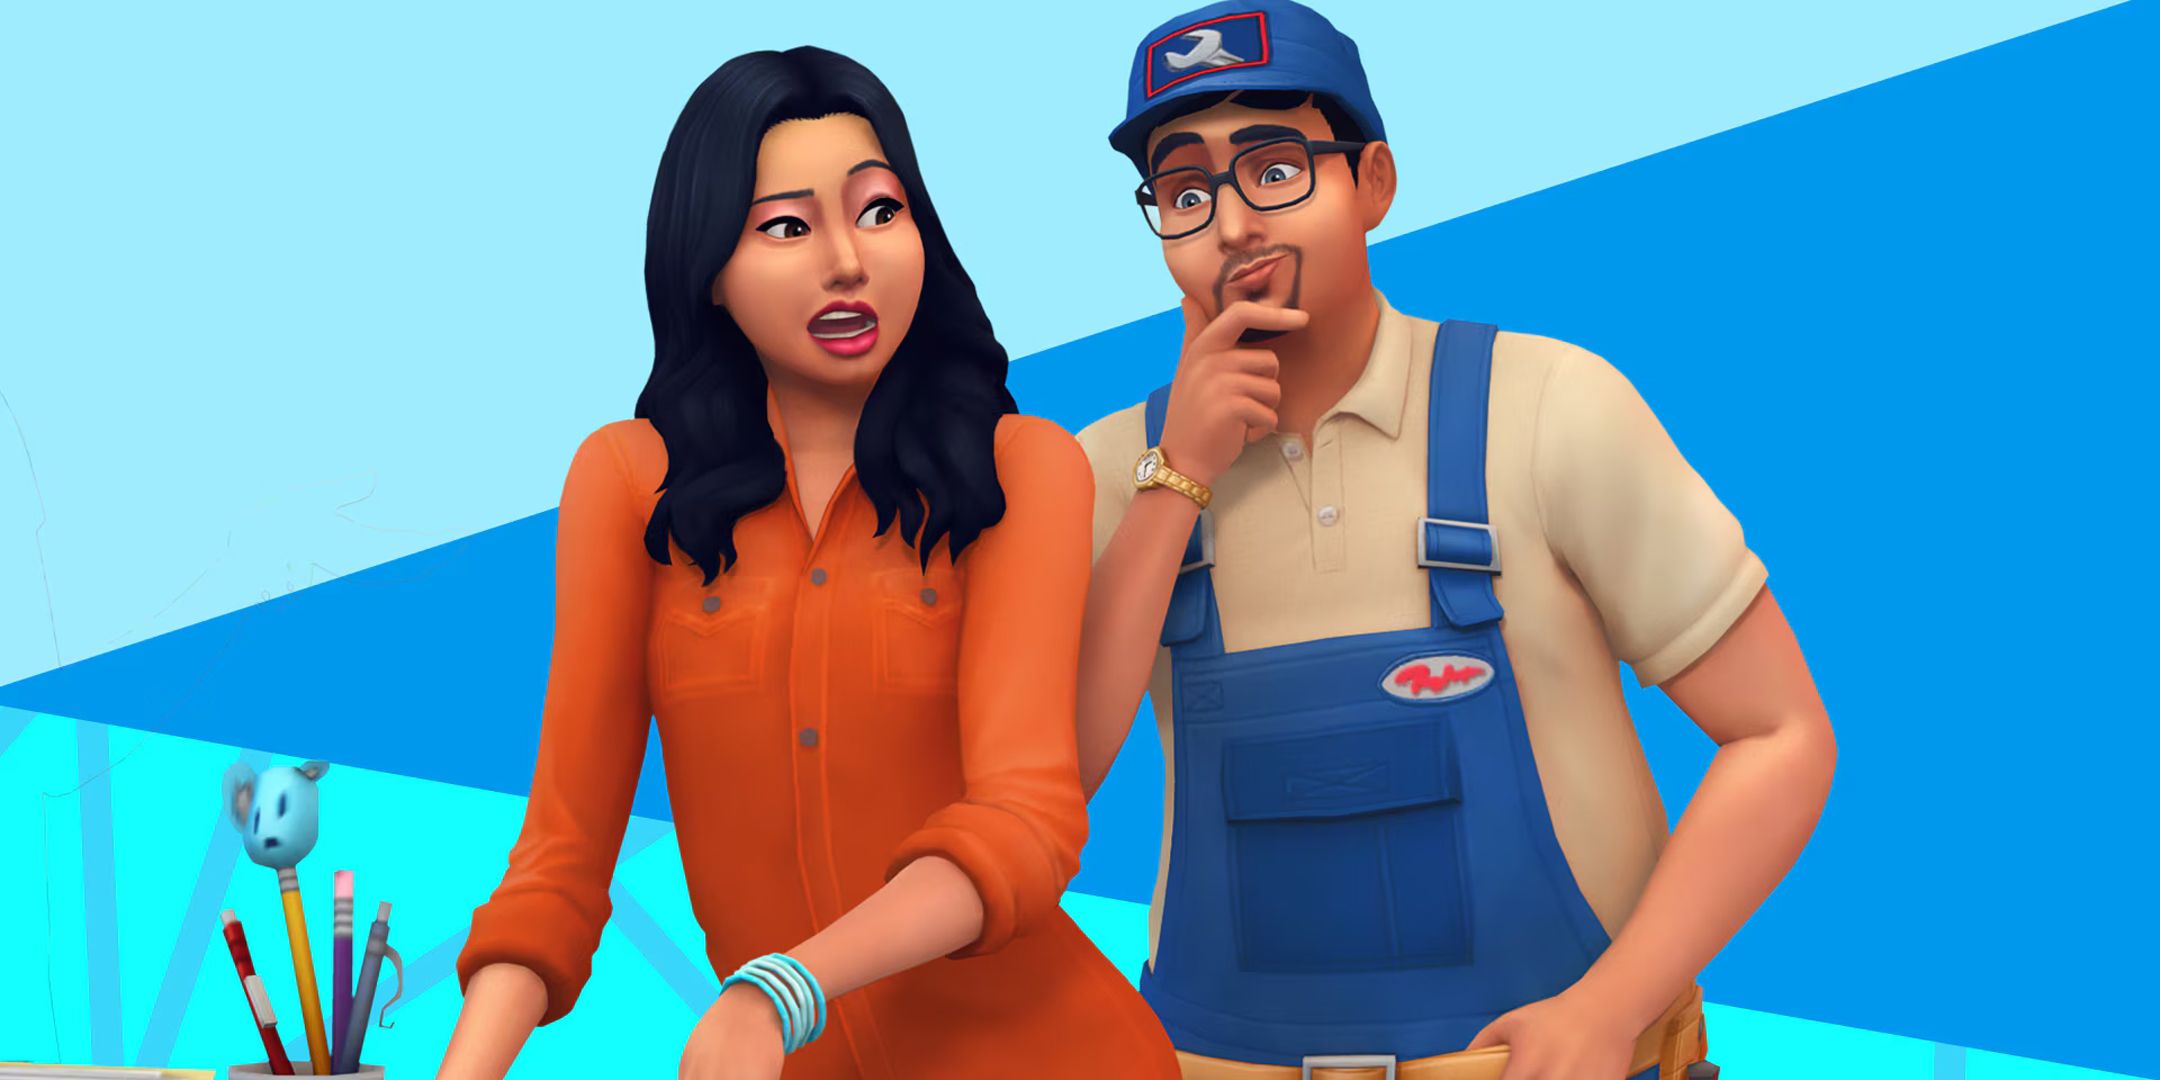 Two characters from the Sims 4 working on a crafting project.